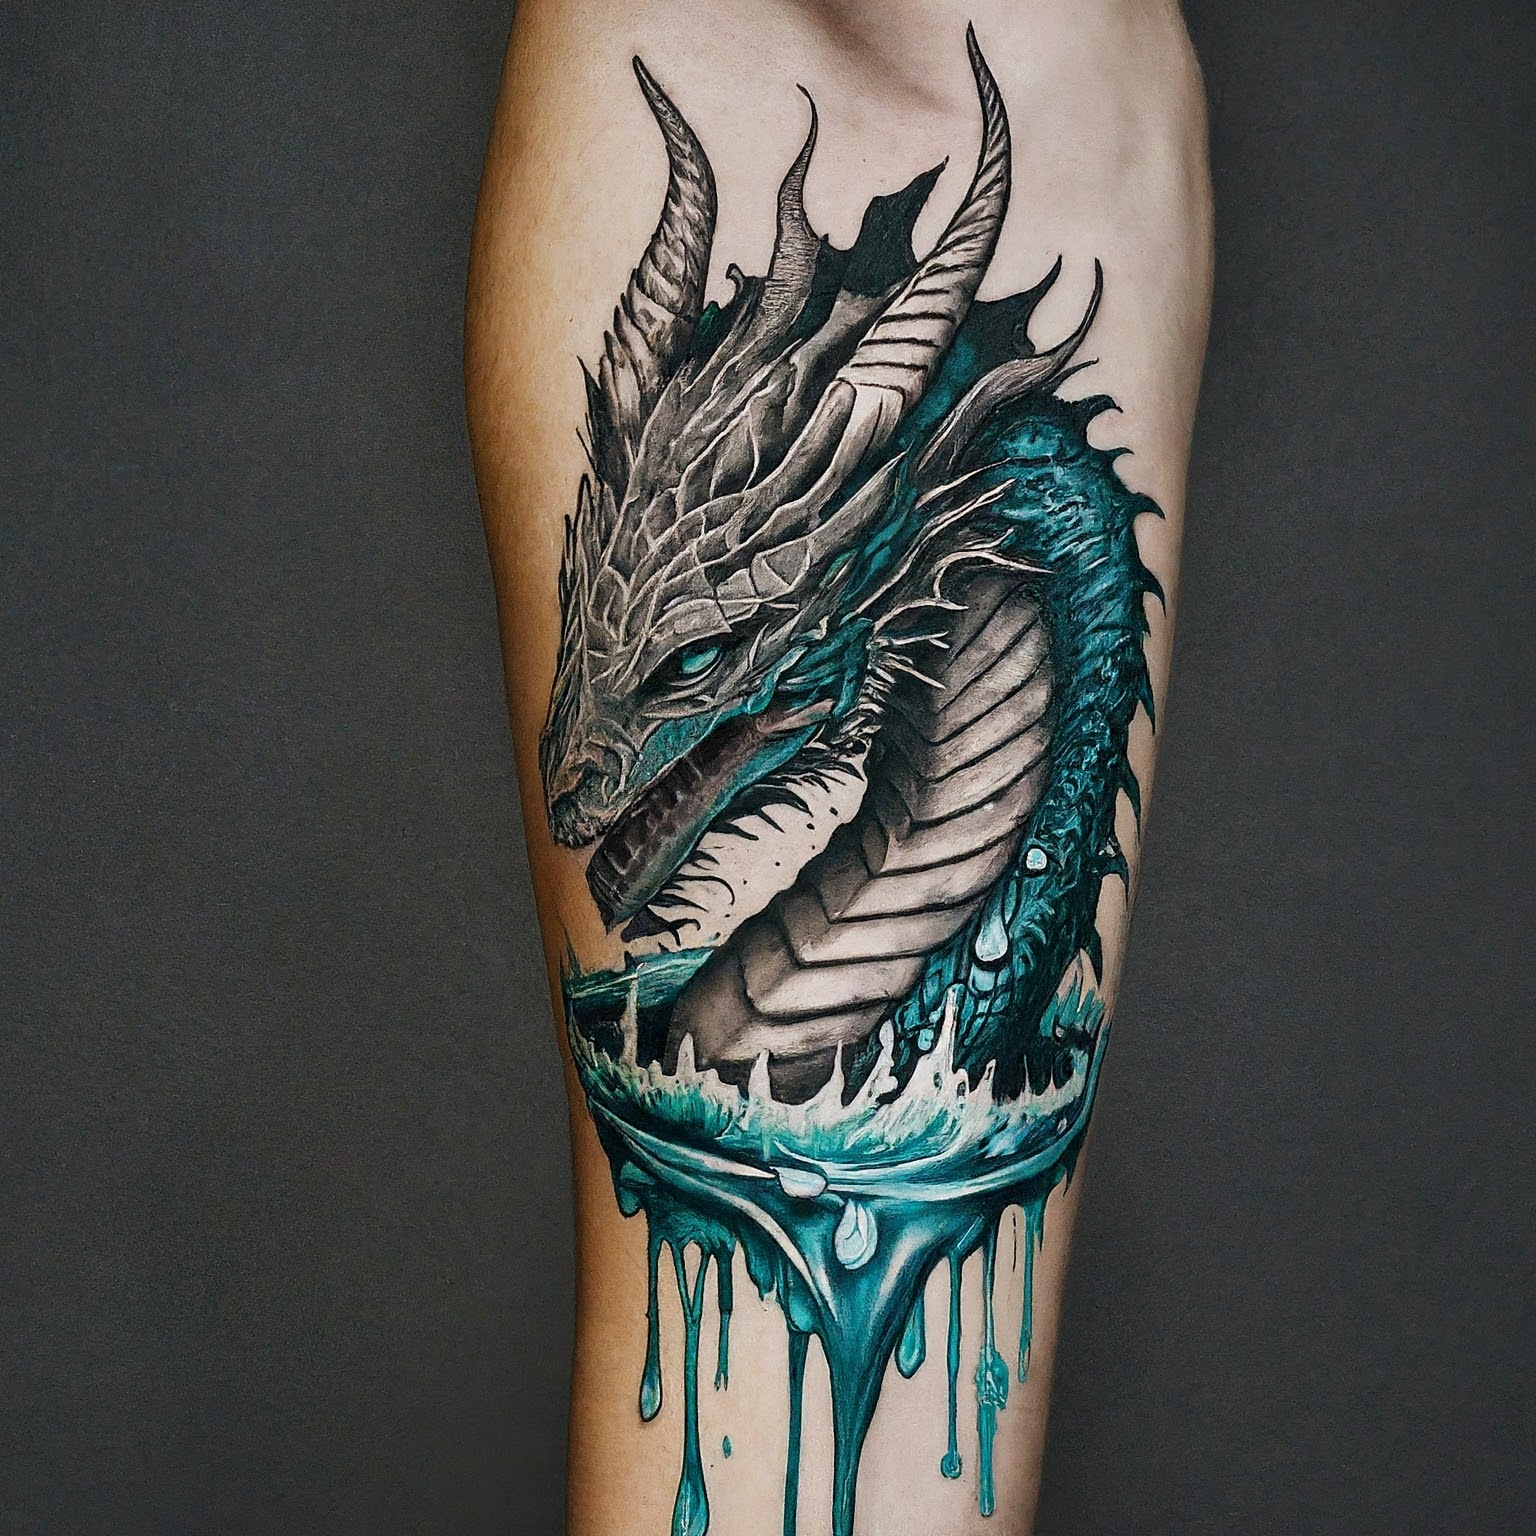 Serpentine Dragon with Water Droplets Tattoo For Forearm